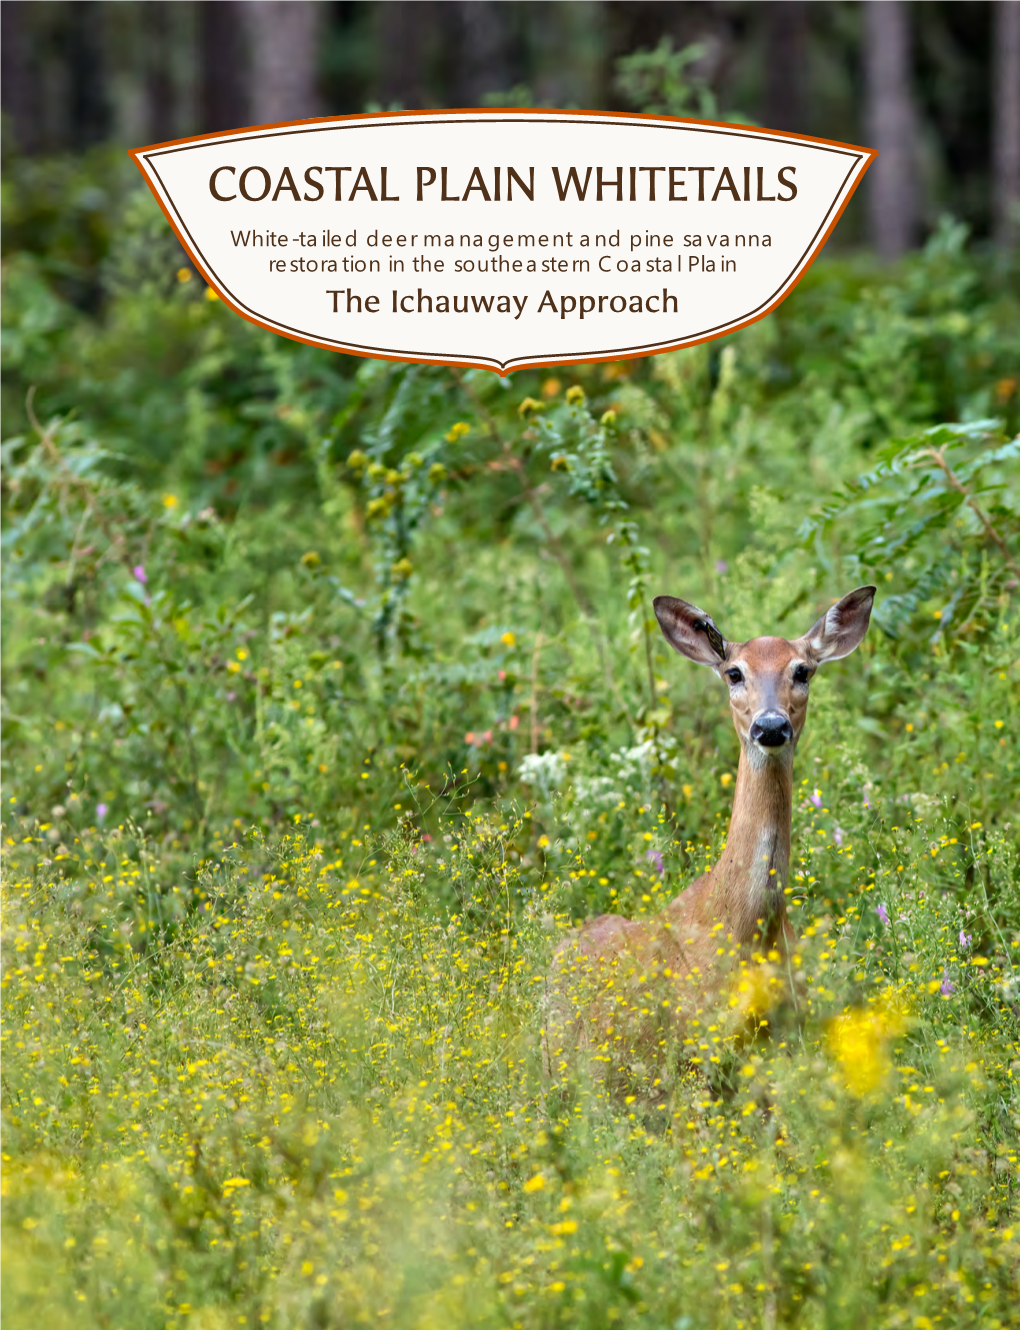 White-Tailed Deer Management and Pine Savanna Restoration in the Southeastern Coastal Plain the Ichauway Approach